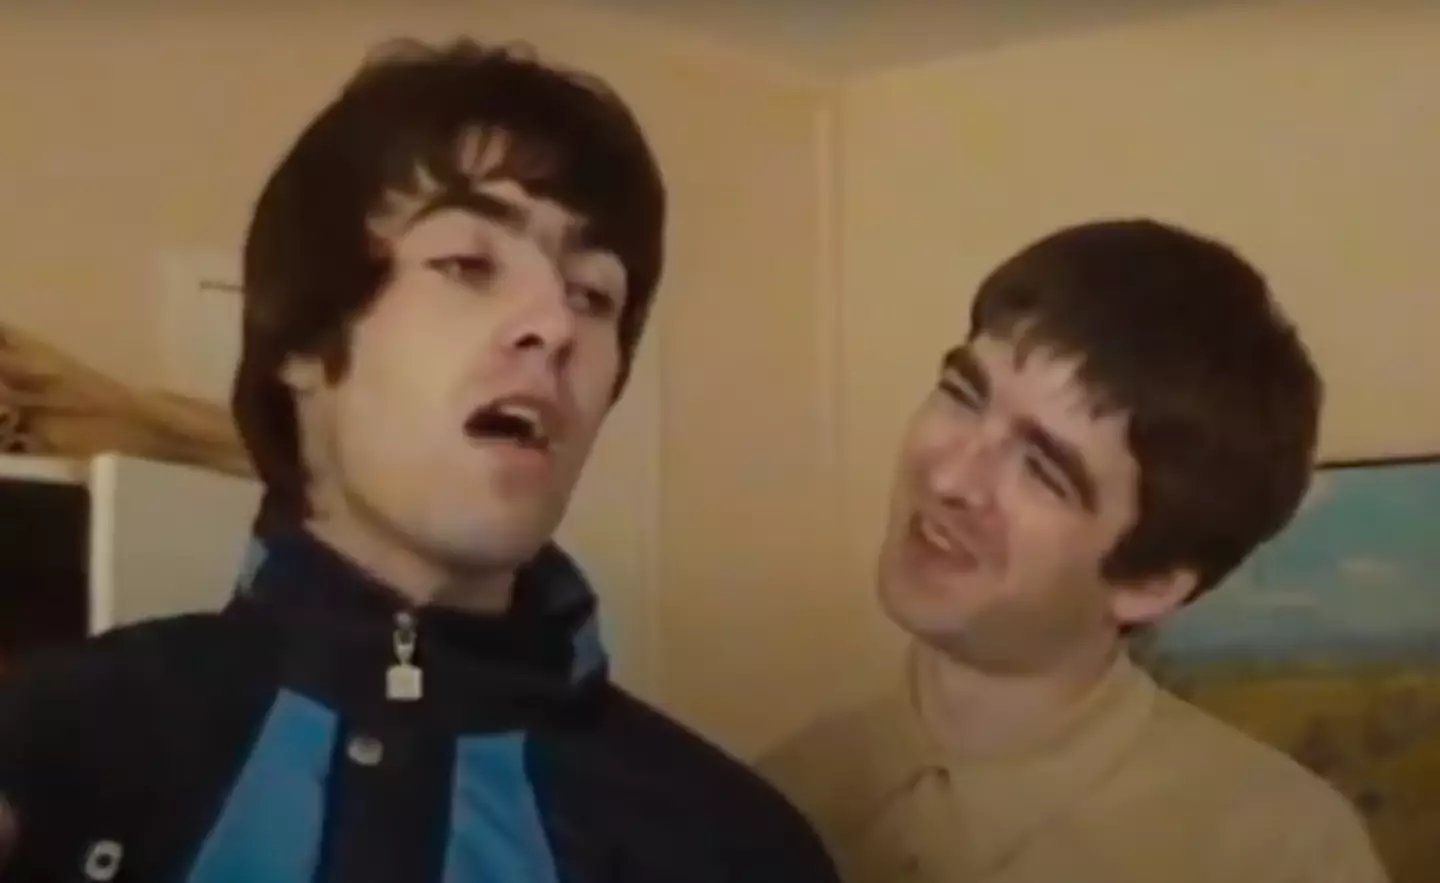 The clip from Supersonic features the Gallagher brothers in more harmonious times.